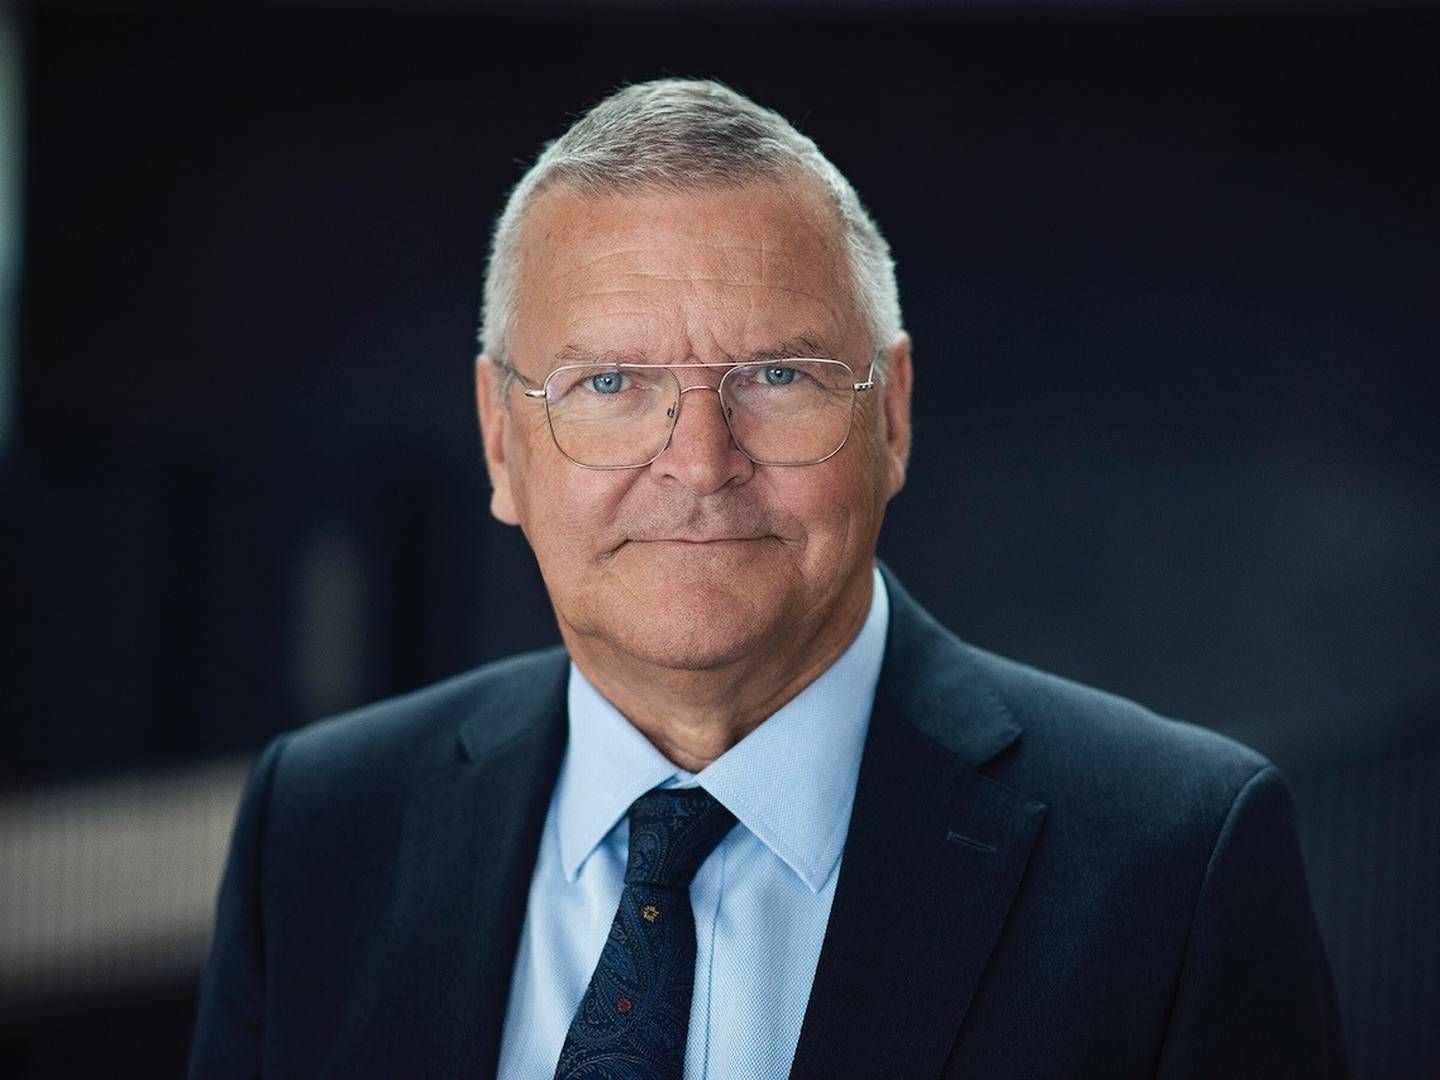 Lars Rohde will become a Nordea board member – instead of Alecta chair. | Photo: Alecta / PR